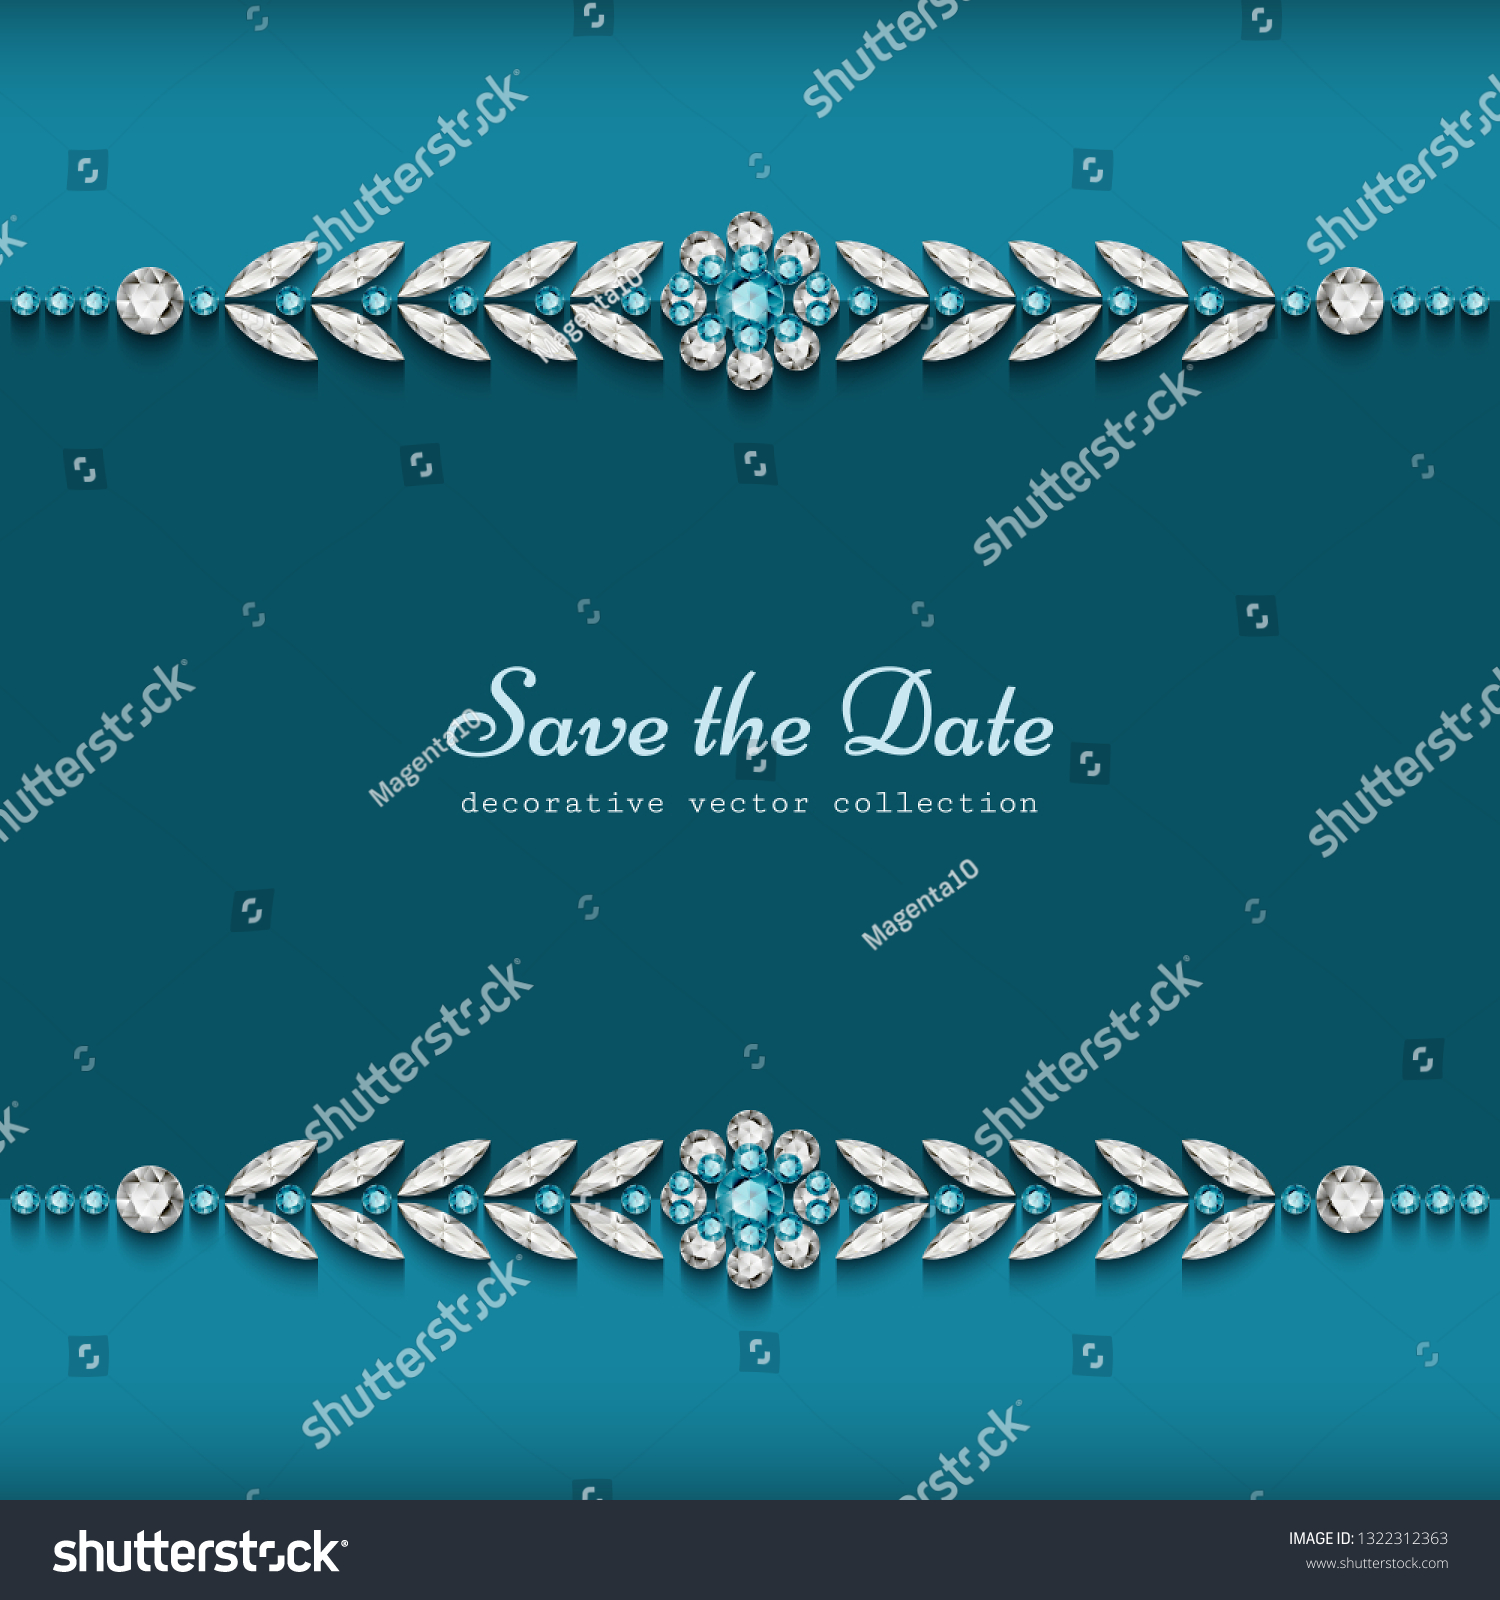 SVG of Elegant diamond jewelry background with ornamental borders, jewellery decoration for wedding invitation or save the date card template, vector illustration with place for text. svg